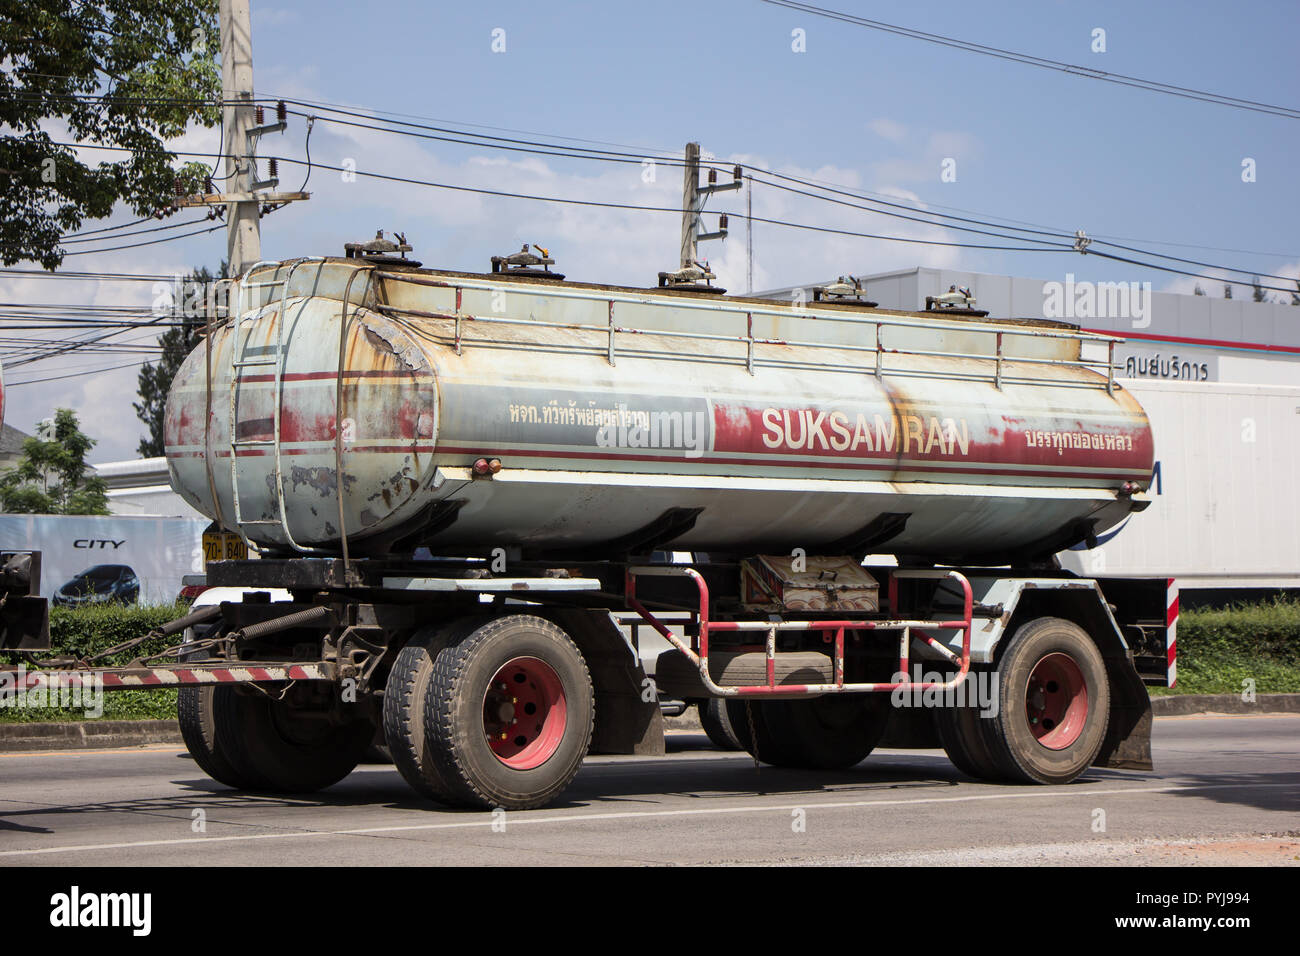 Chiangmai, Thailand - September 25 2018: Trailer Truck and Palm Oil Tank Truck of Suksamran Transport. Photo at road no 121 about 8 km from downtown C Stock Photo